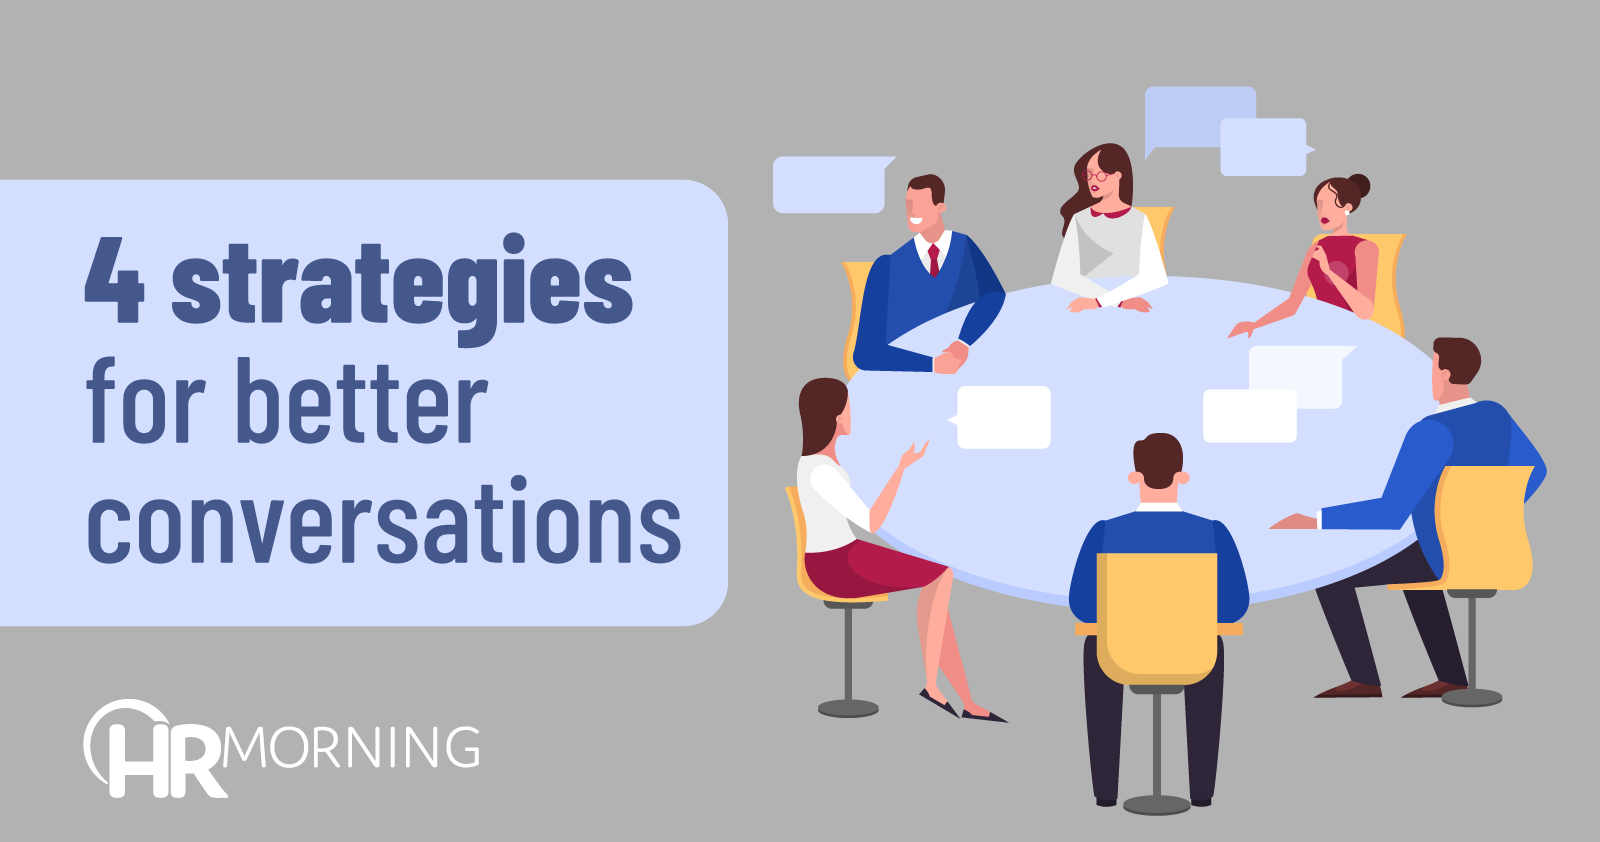 4 strategies for better conversations